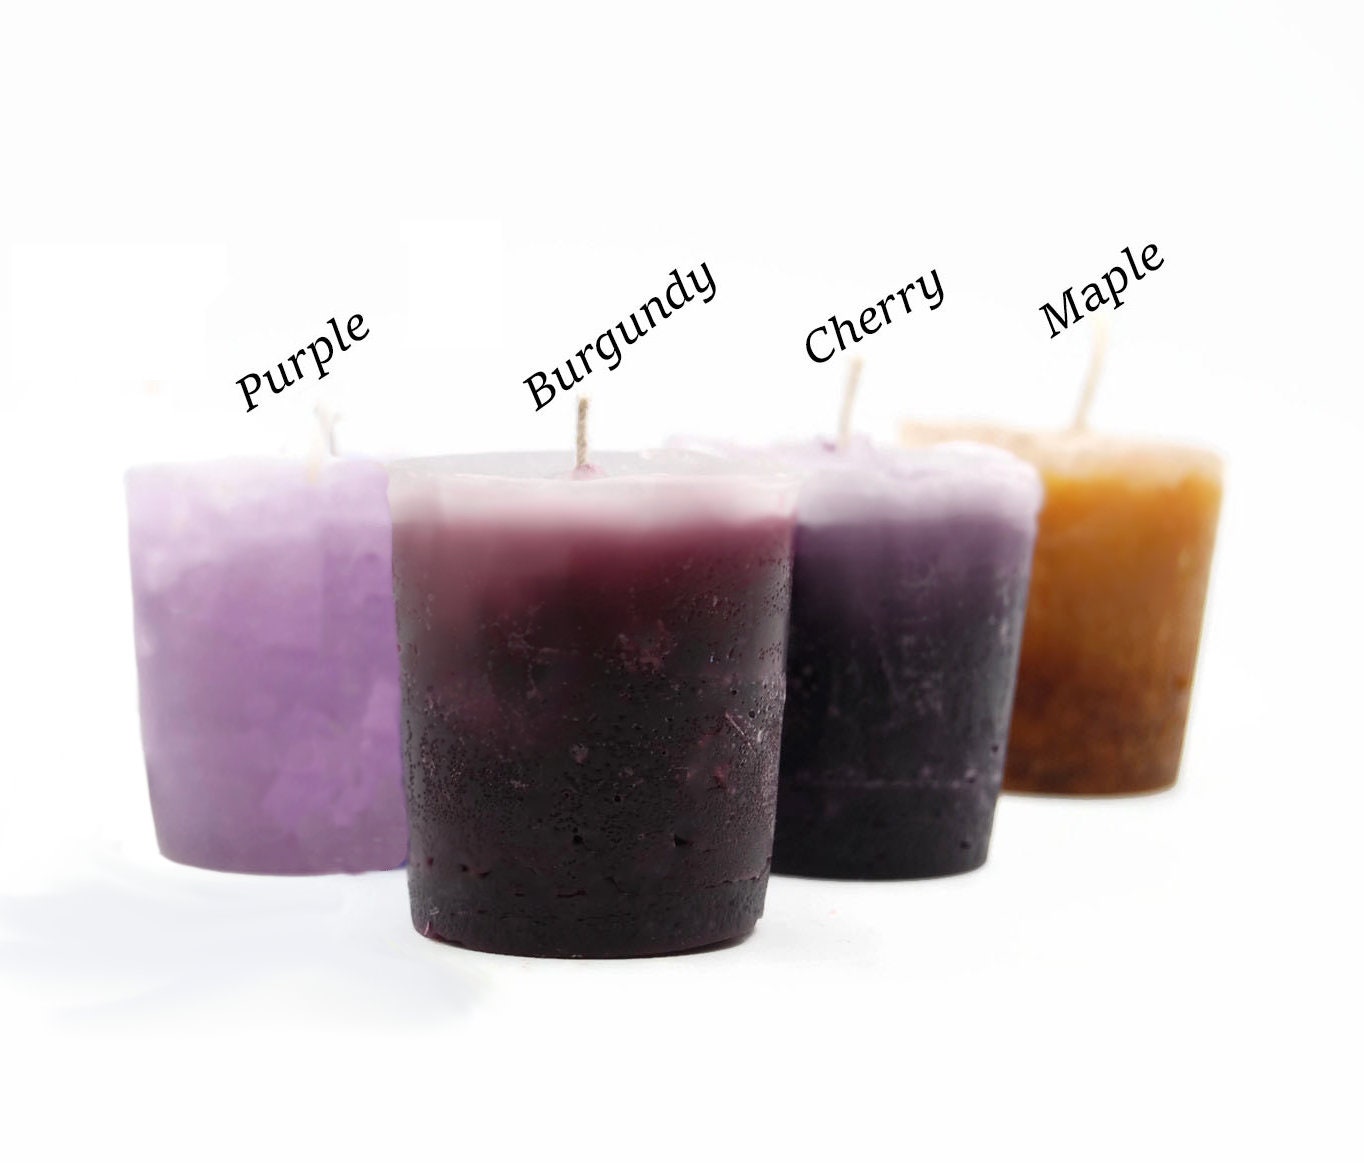 50g Oil-based Candle Dye Pigment Handmade Paraffin Soybean